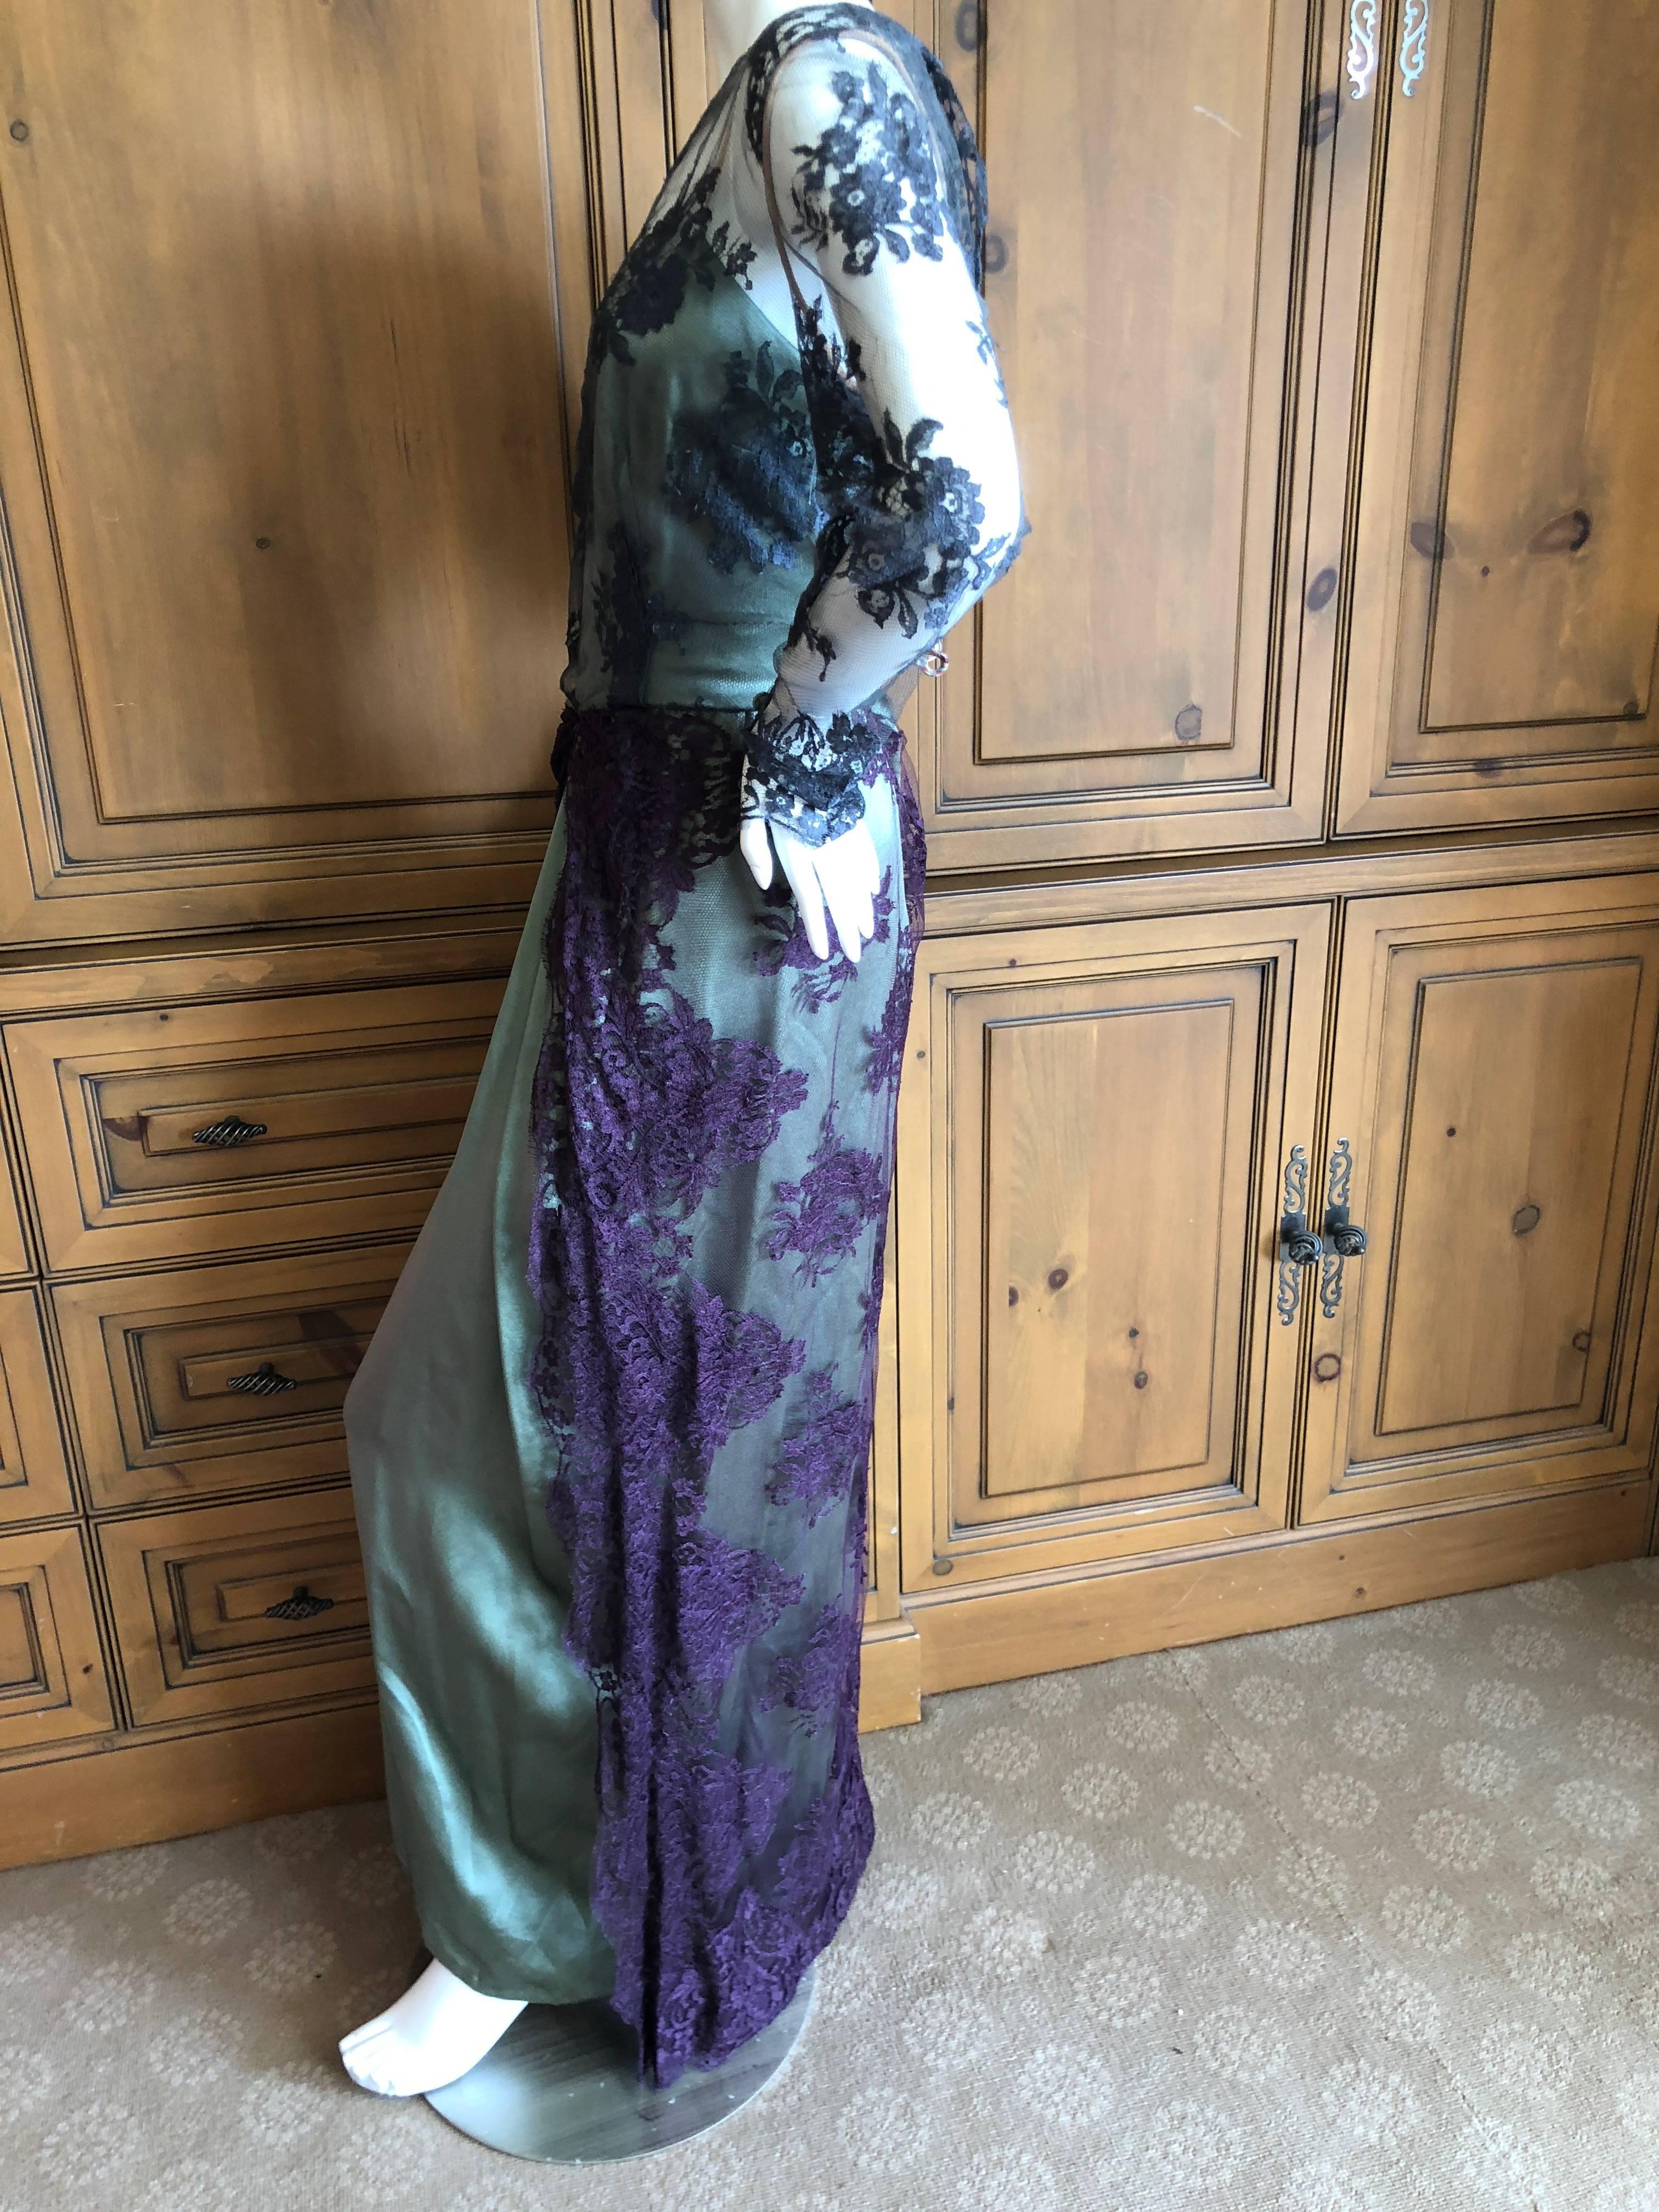 Bill Blass Vintage 1970's Silk Evening Dress with Lace Overlay Details For Sale 4